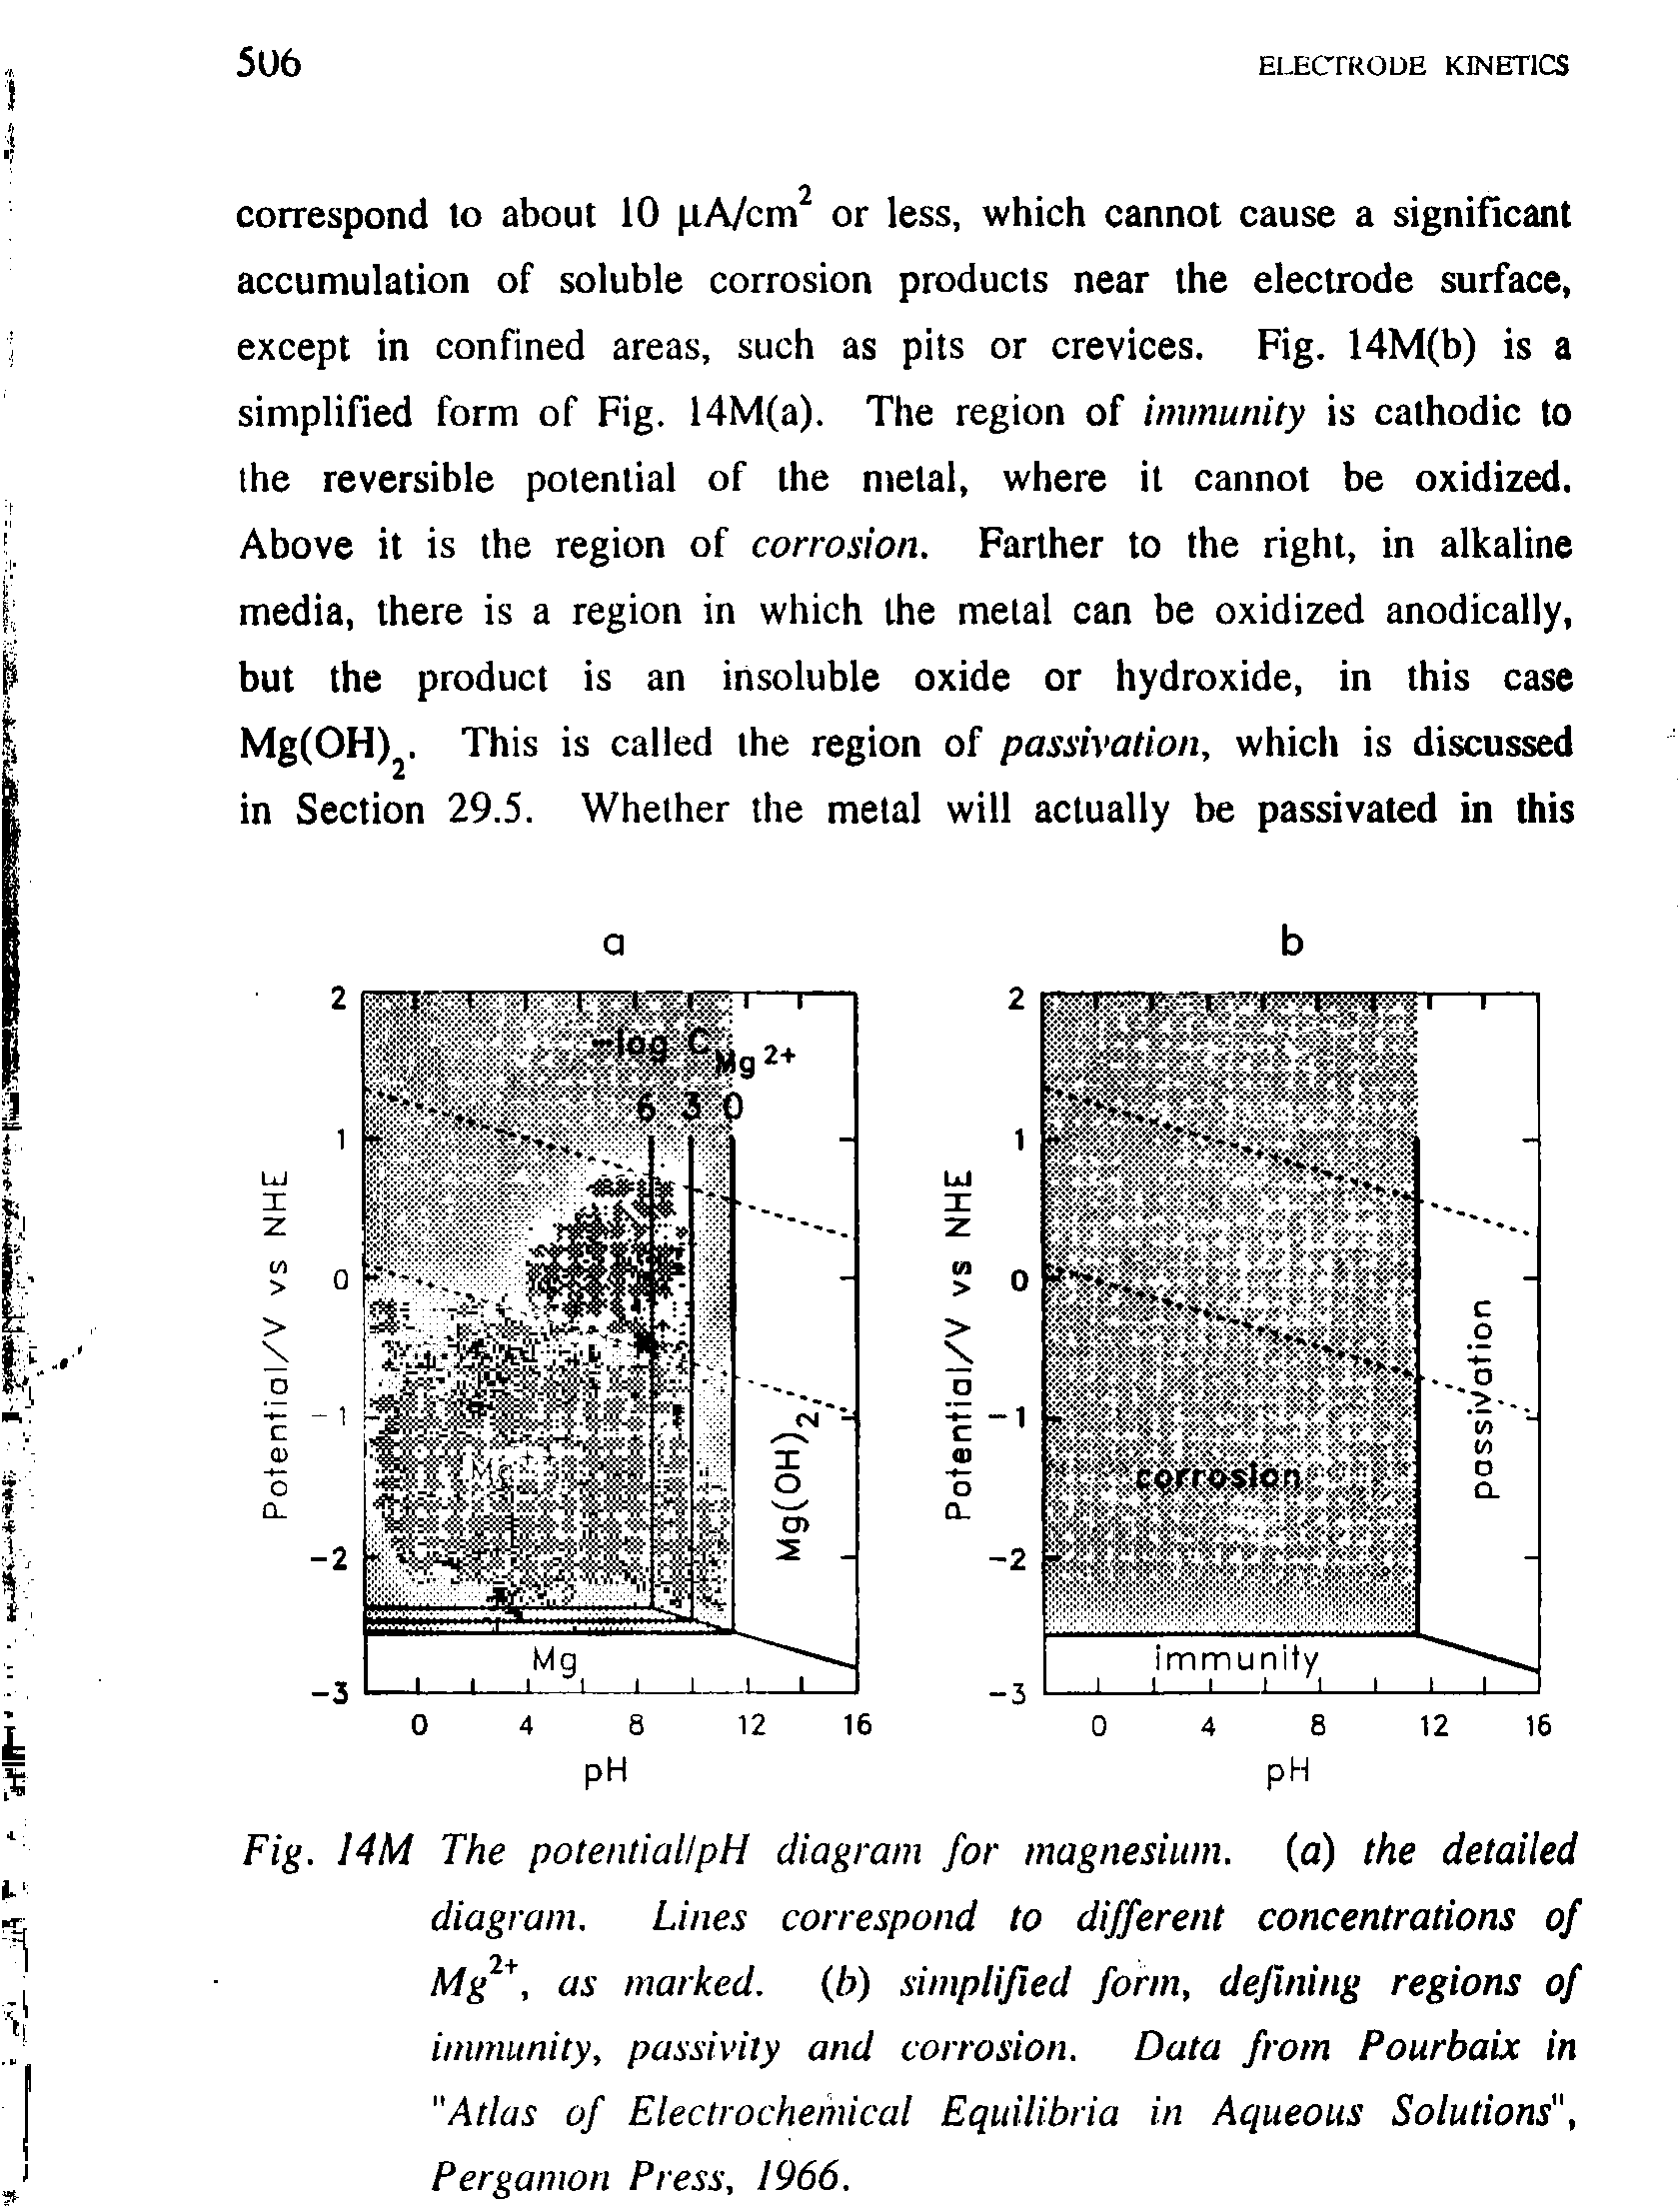 Fig. 14M The potentiallpH diagram for magnesium, (a) the detailed diagram. Lines correspond to different concentrations of Mg, as marked, (b) simplified form, defining regions of immunity, passivity and corrosion. Data from Pourbaix in "Atlas of Electrochemical Equilibria in Aqueous Solutions", Pergamon Press, 1966.